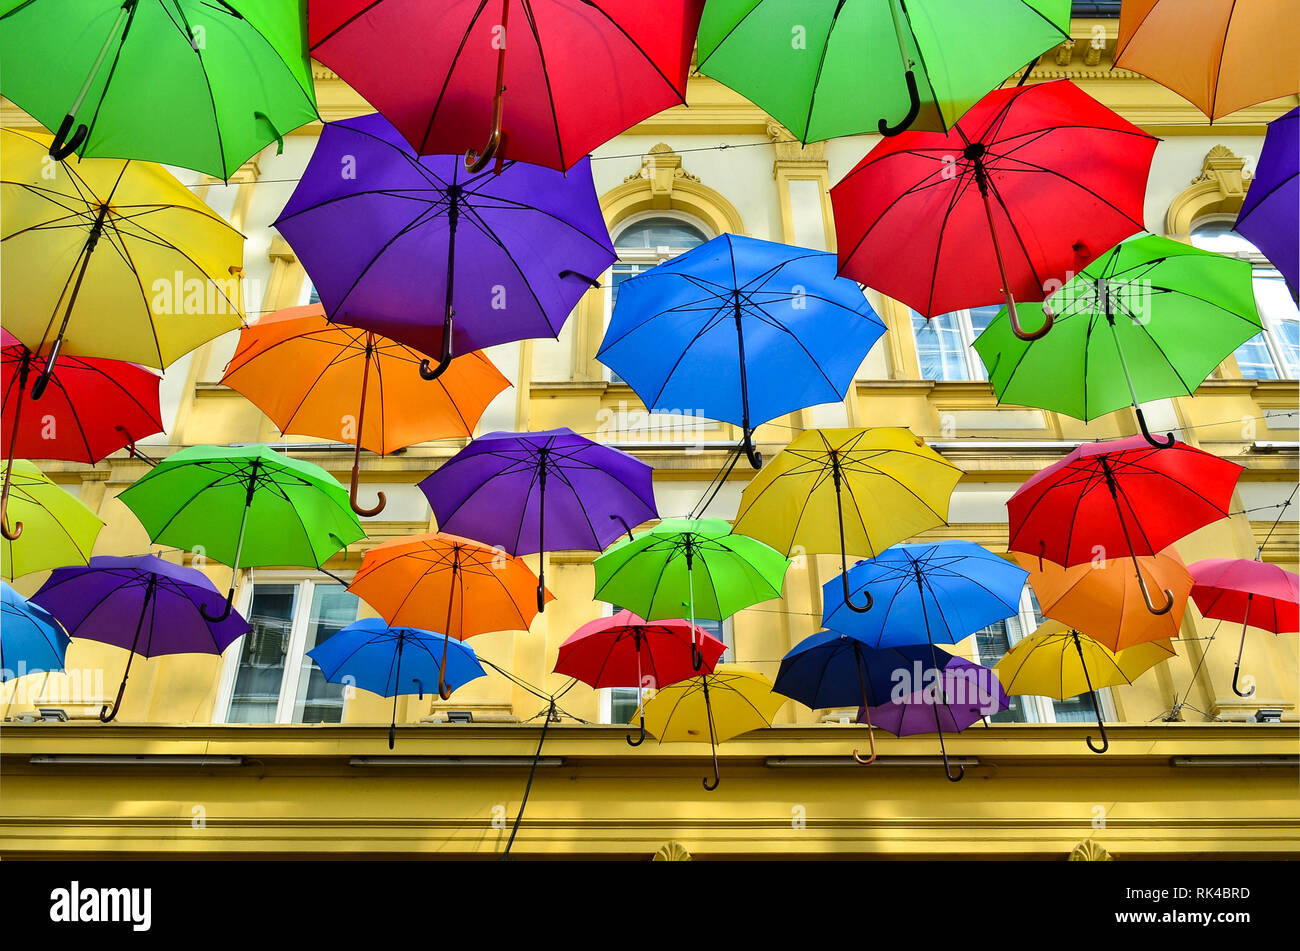 Street decoration, lots of colorful umbrellas in the air, Belgrade, Serbia Stock Photo